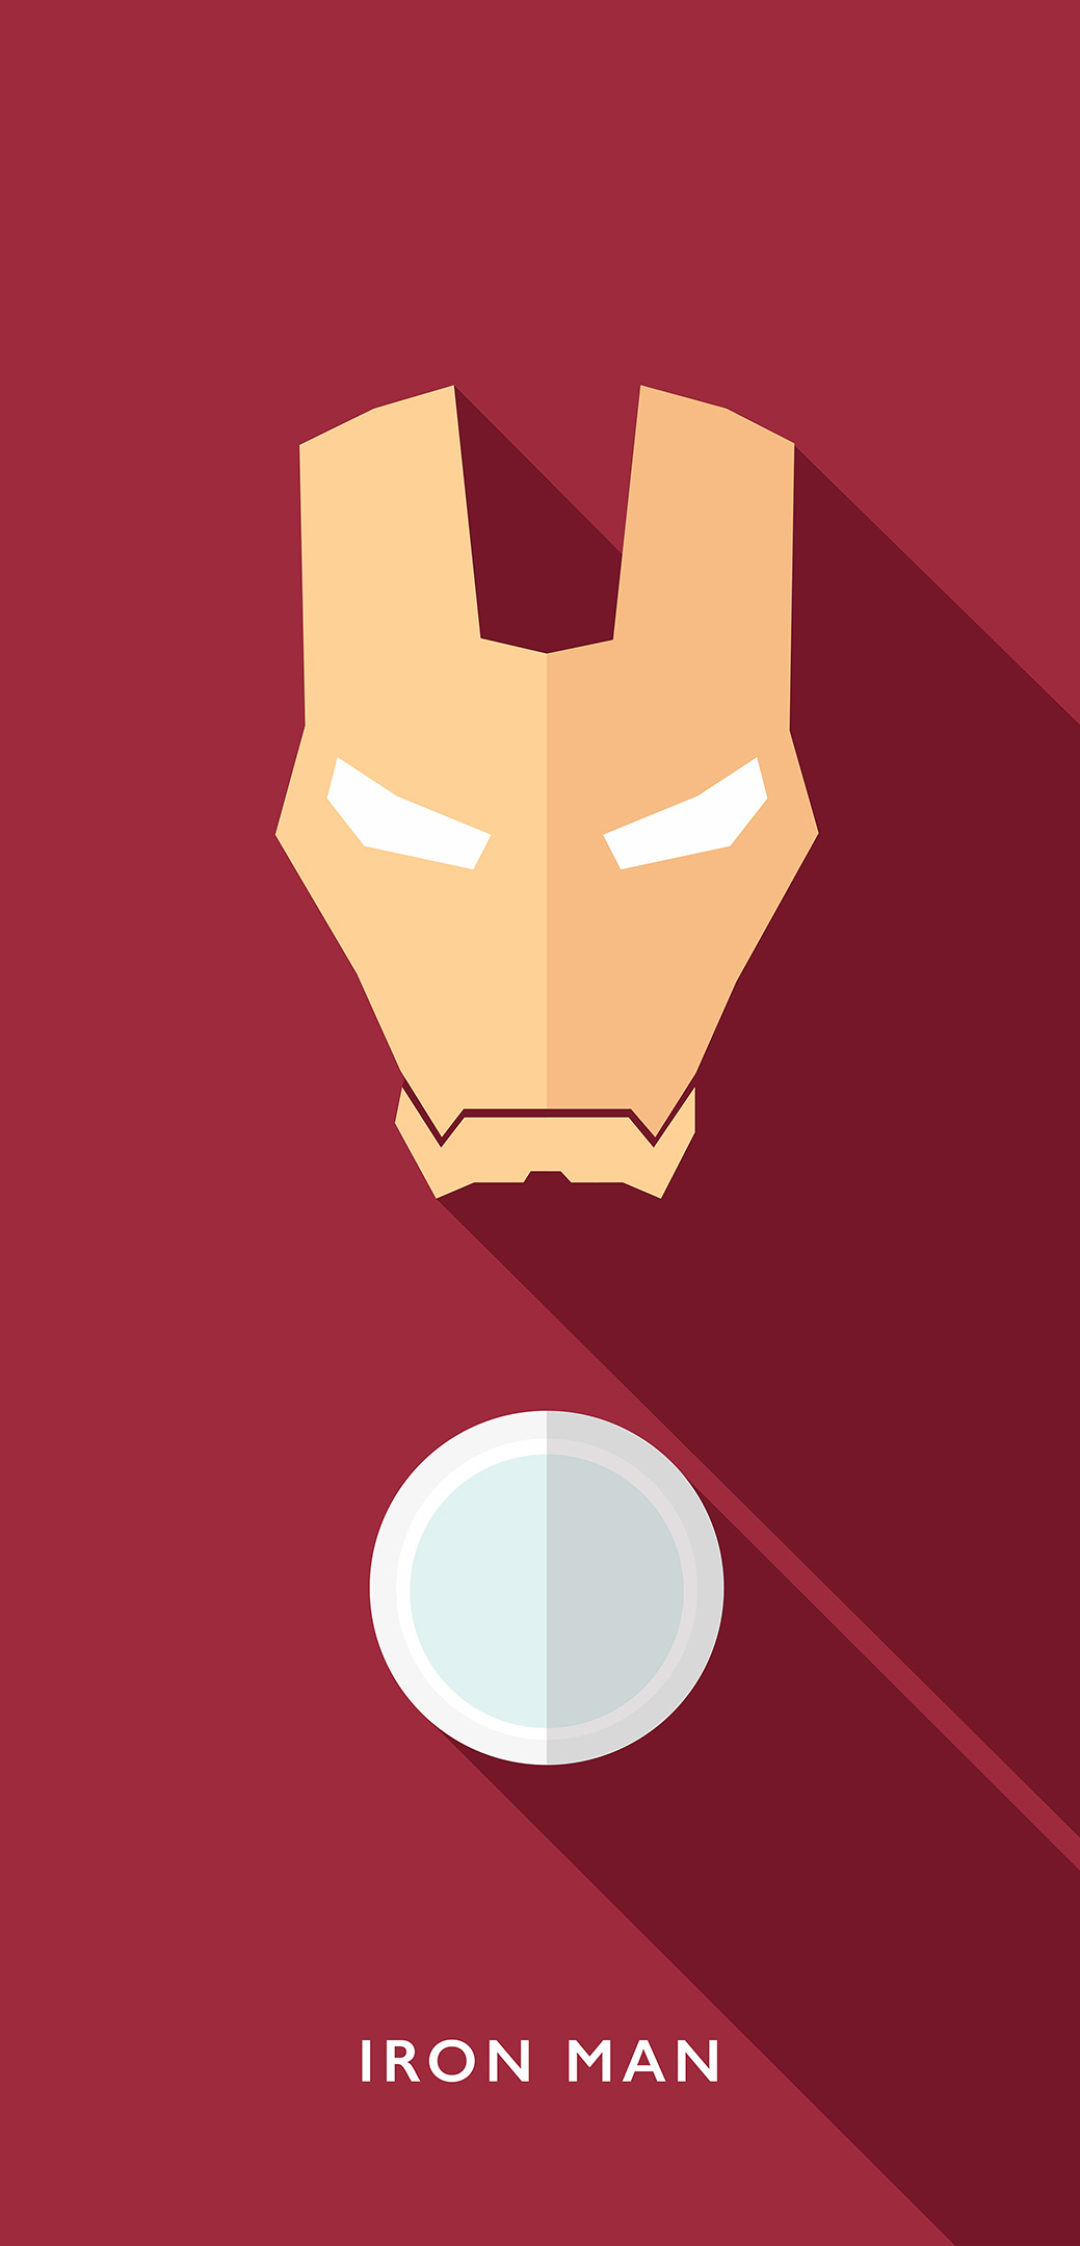 Iron Man Phone Wallpaper by Jarno van der Geest - Mobile Abyss